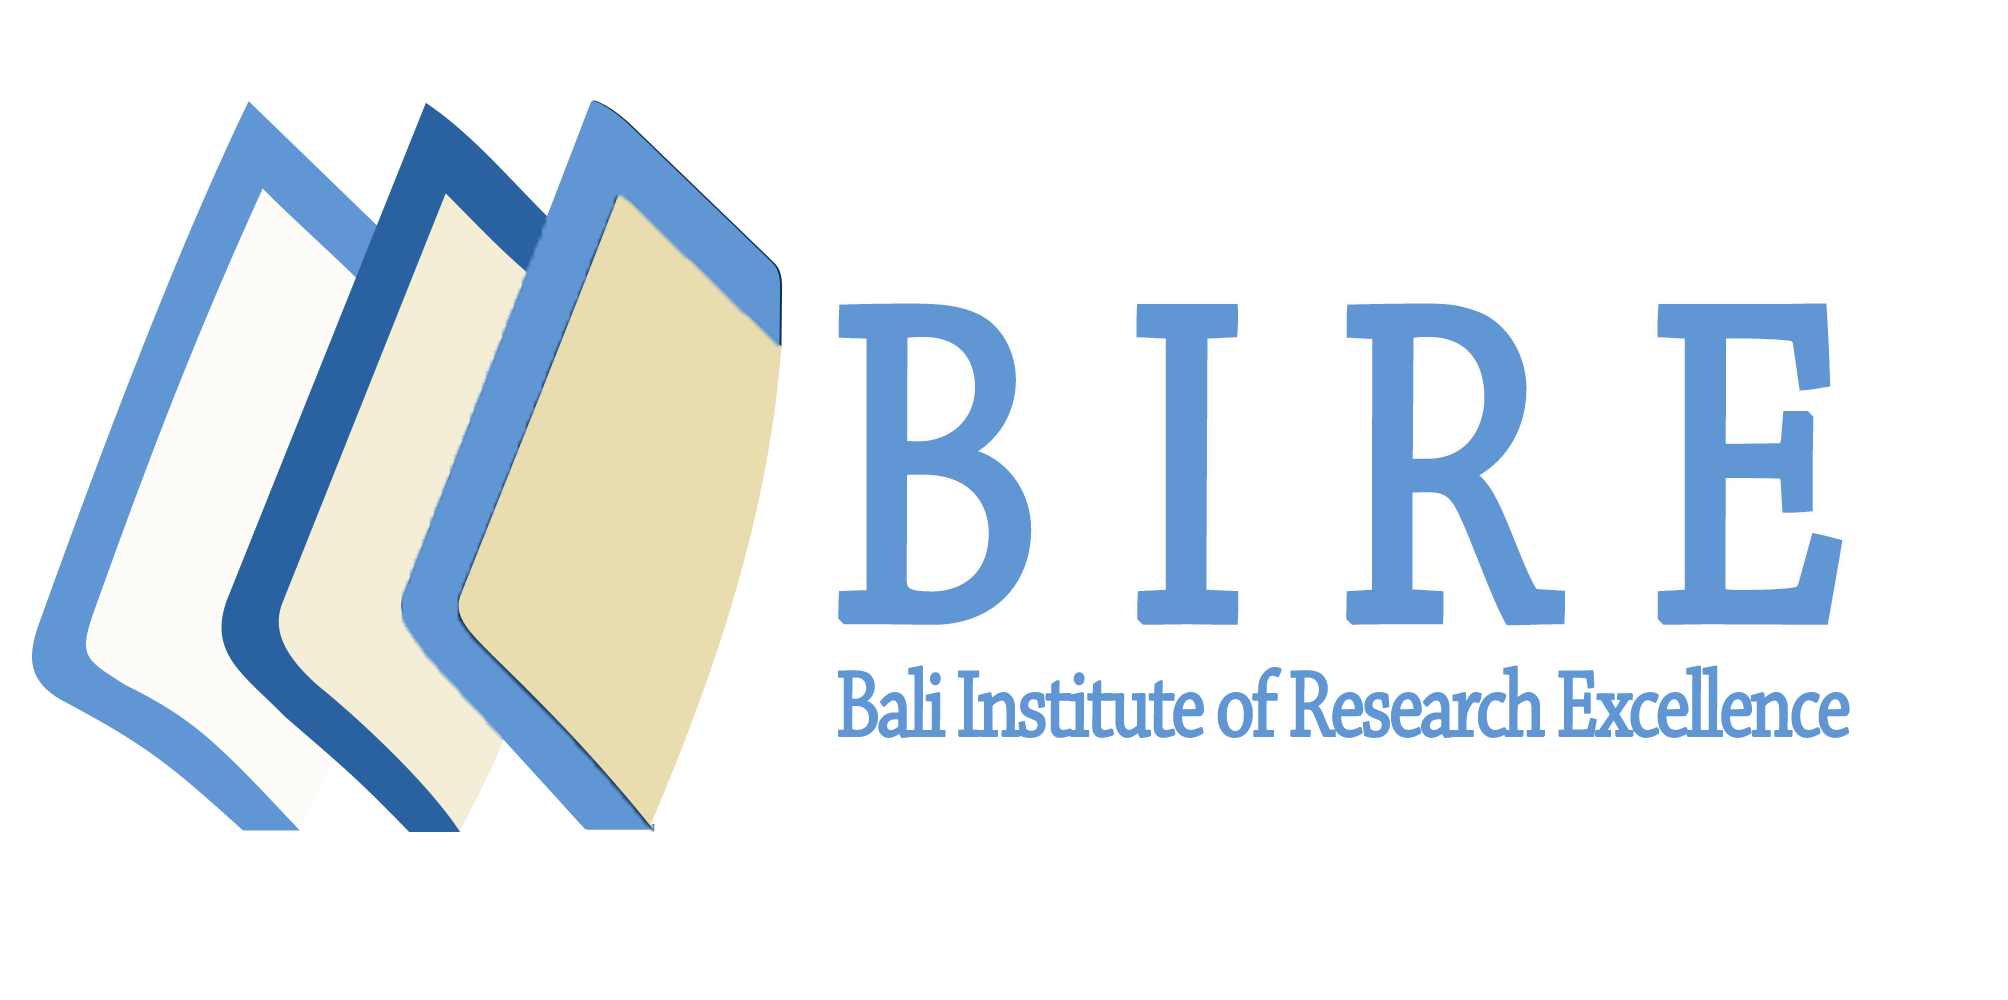 RBSEIT-2022 2022 International Conference on Current Research in Business Management, Social Sciences, Economics and Information Technology